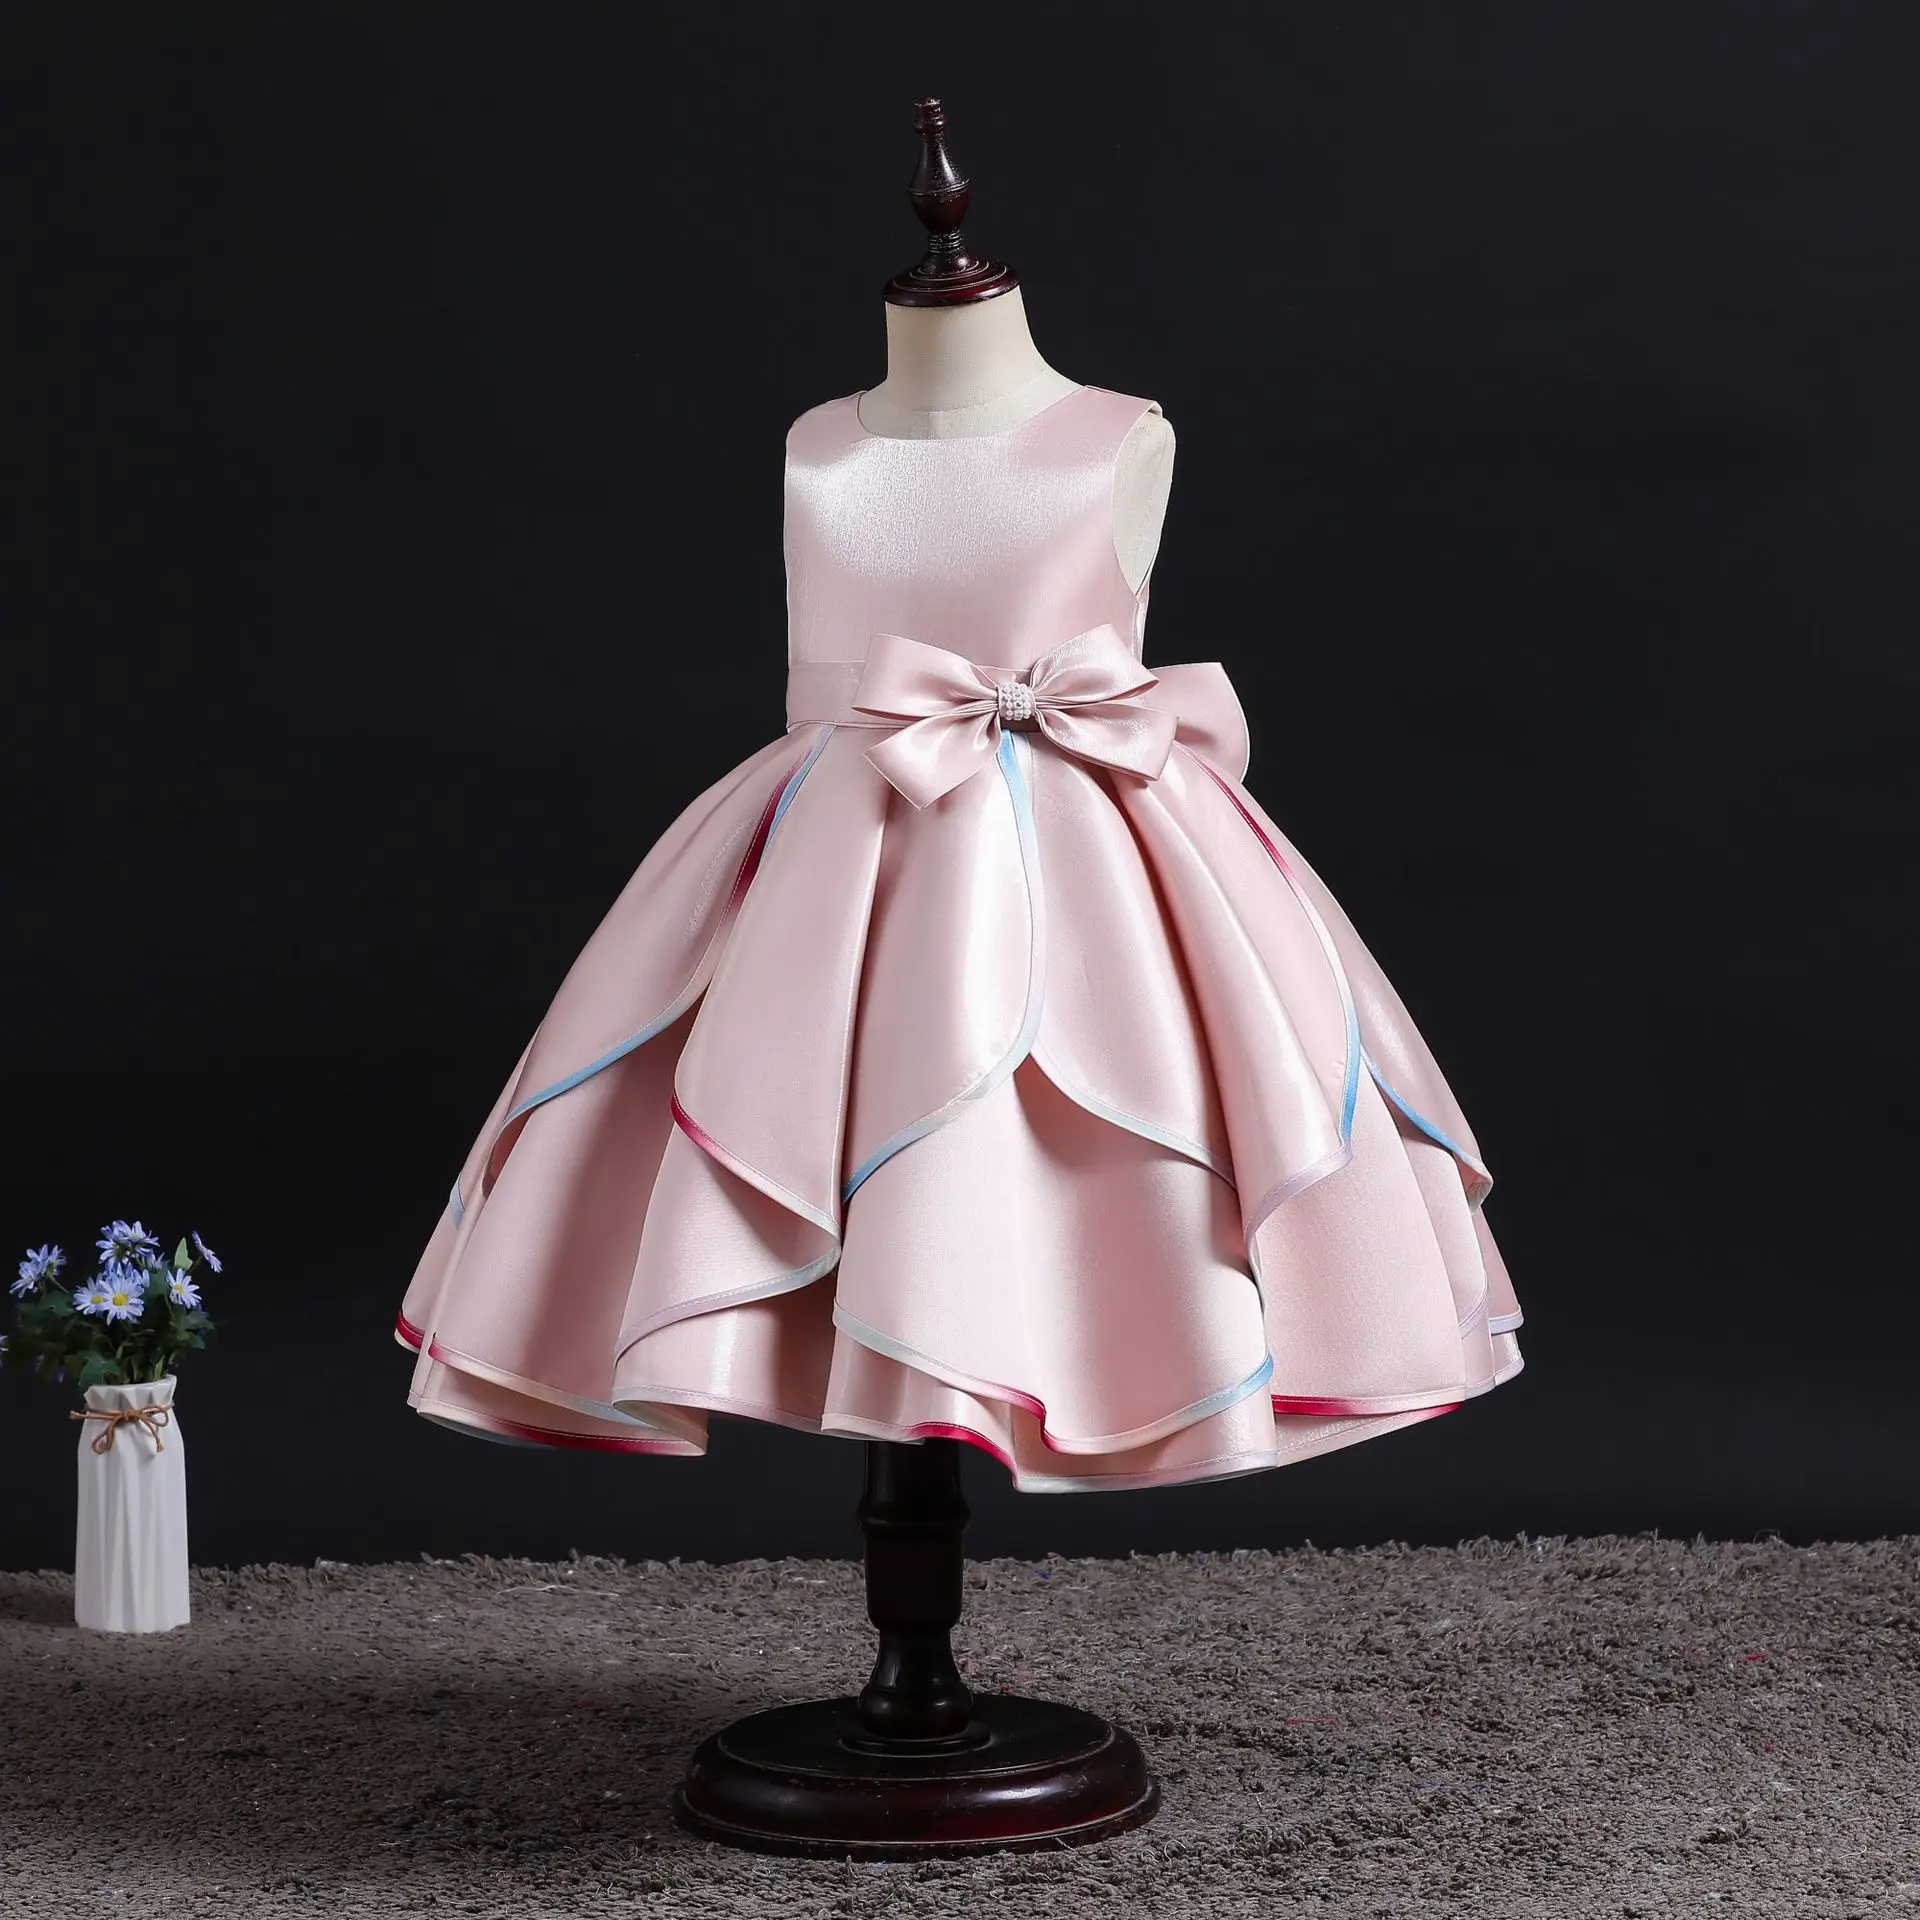 New Fashion Cute Baby Girl Cotton Dress Lace Short Sleeve Girls Princess  Dress For Kid Wedding Elegant Party Tutu Prom Gown Fashion Bowknot cute  Kids Clothing Girl Dress Children price from kilimall